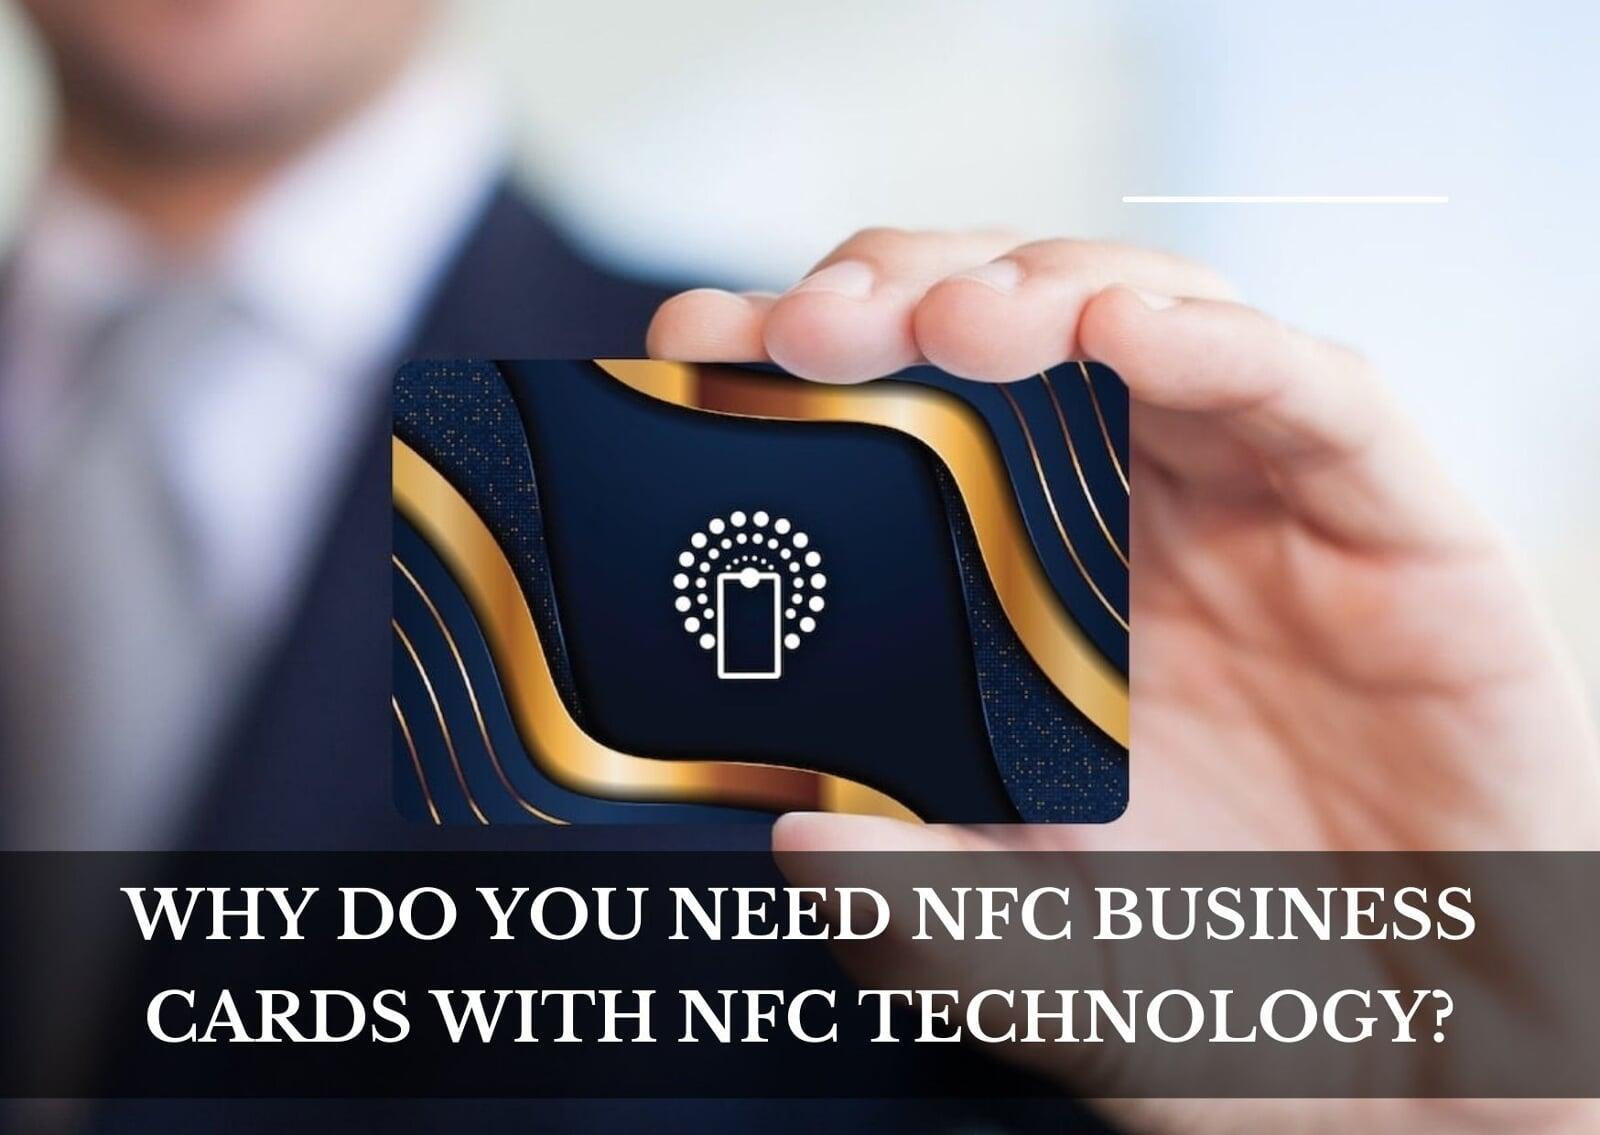 Why Do You Need NFC Business Cards With NFC Technology?